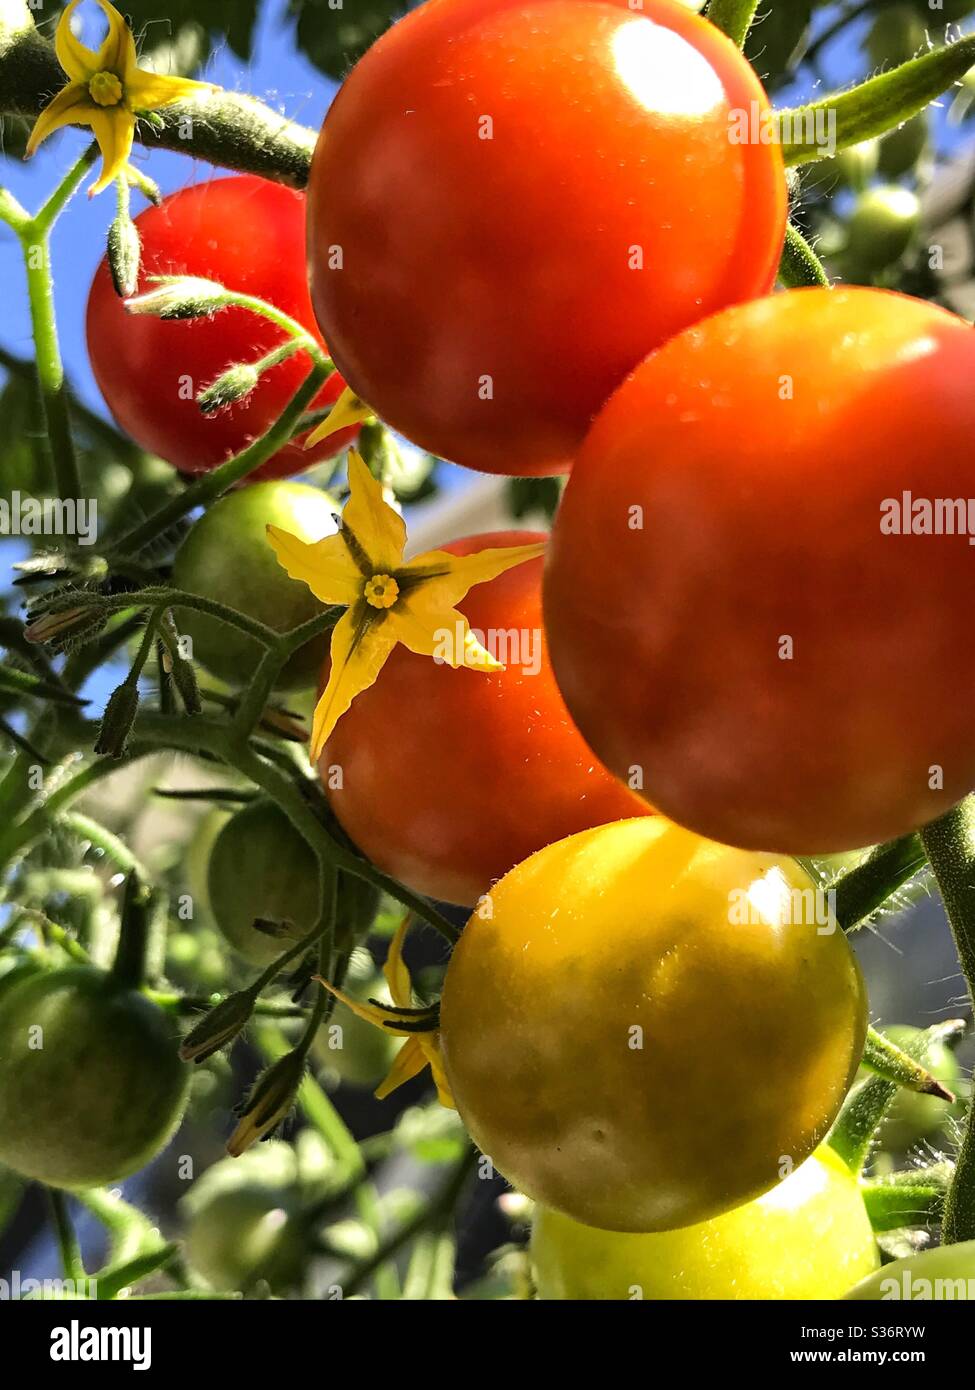 Tomato plant flower surrounded by ripening cherry tomatoes, close up Stock Photo